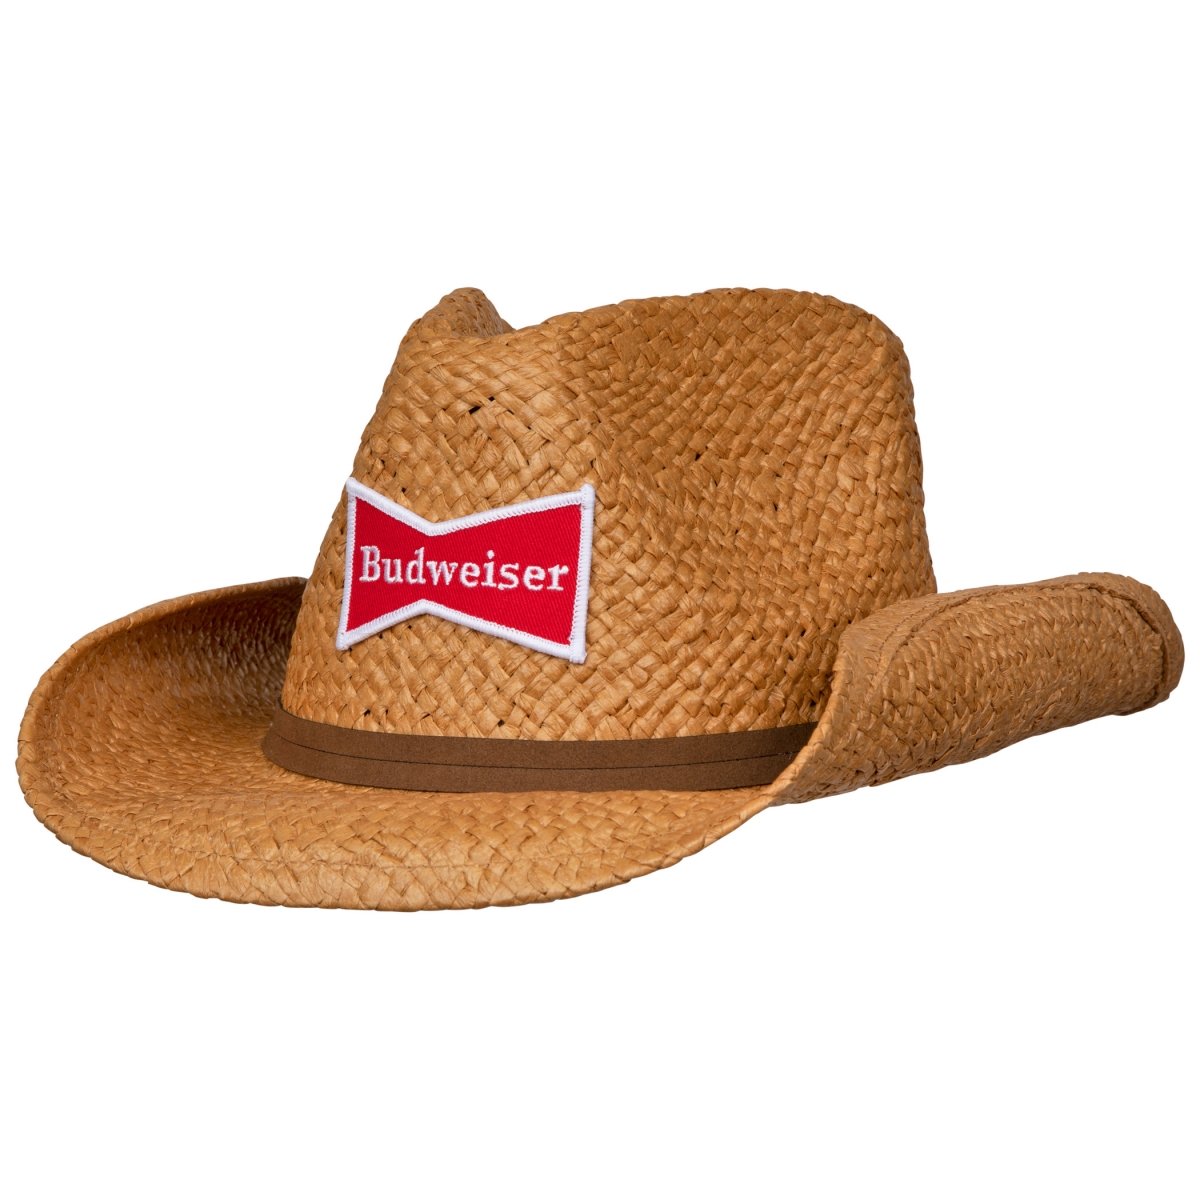 Picture of Budweiser 817726 Straw Cowboy Hat with Brown Band